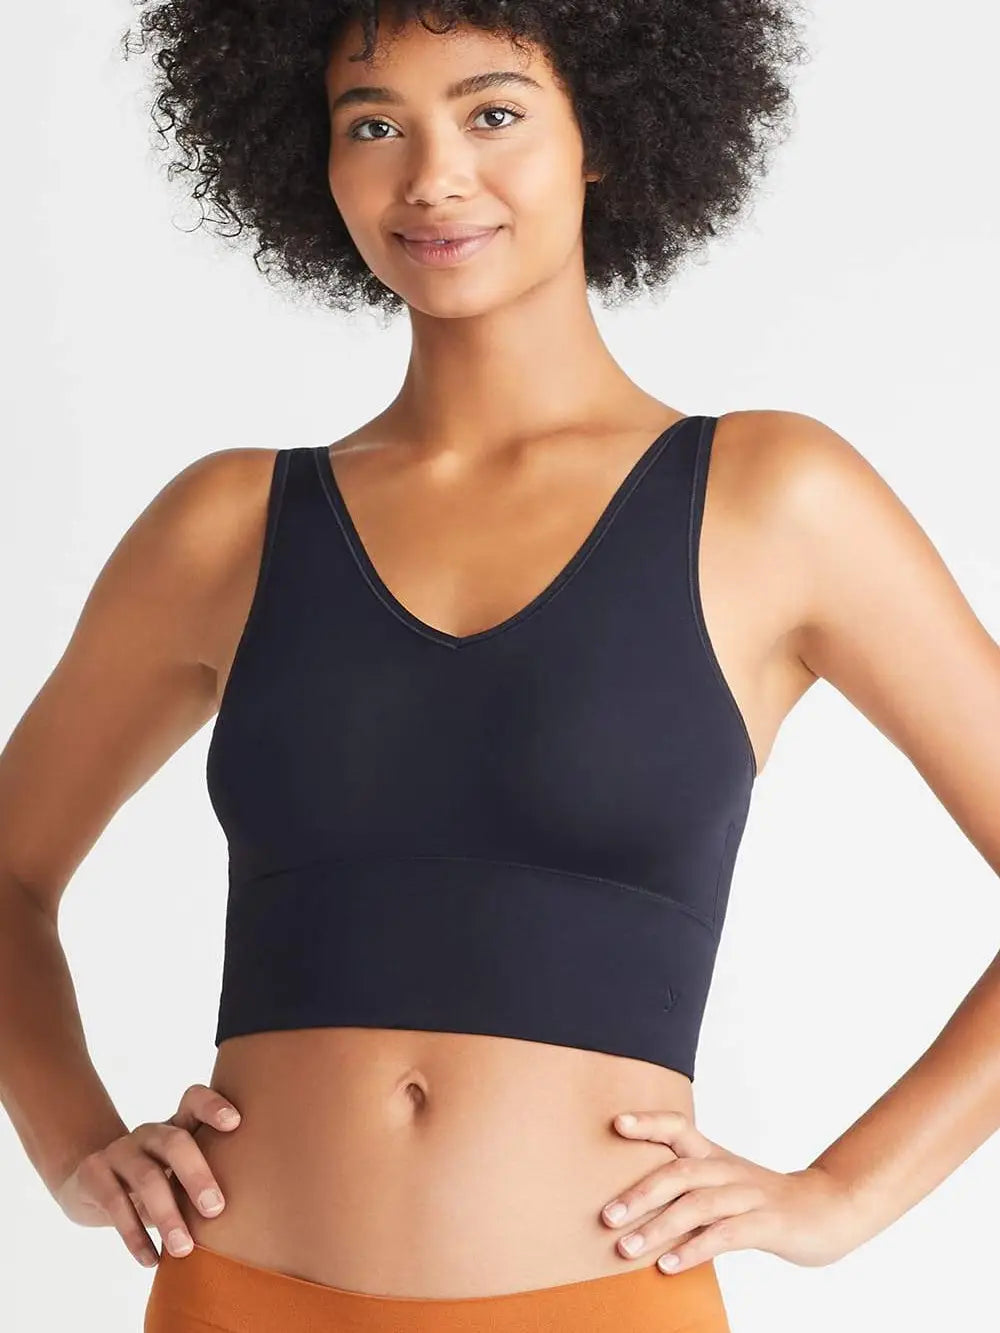 Claudia Comfortably Curved Longline Bra Top in Black - Seamless